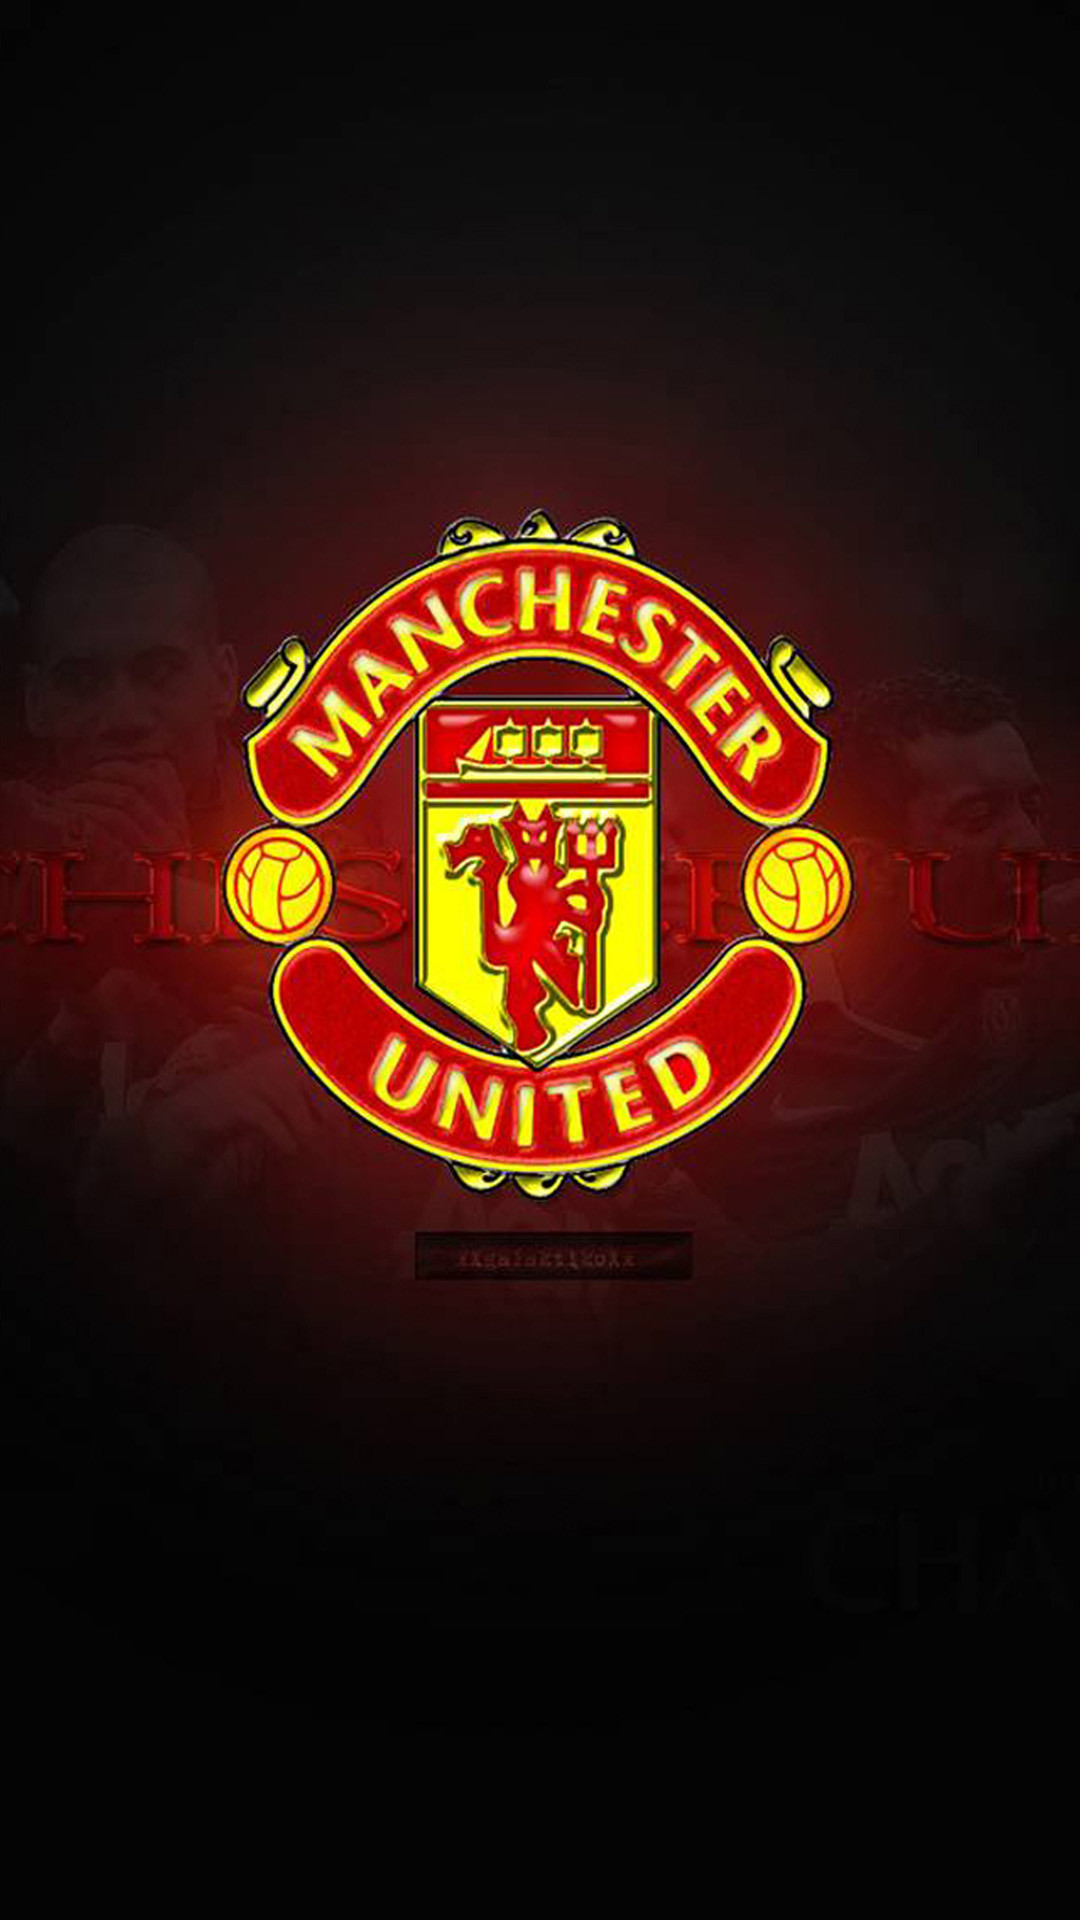 1080x1920 Search Results for “manchester united hd wallpaper android app” – Adorable  Wallpapers